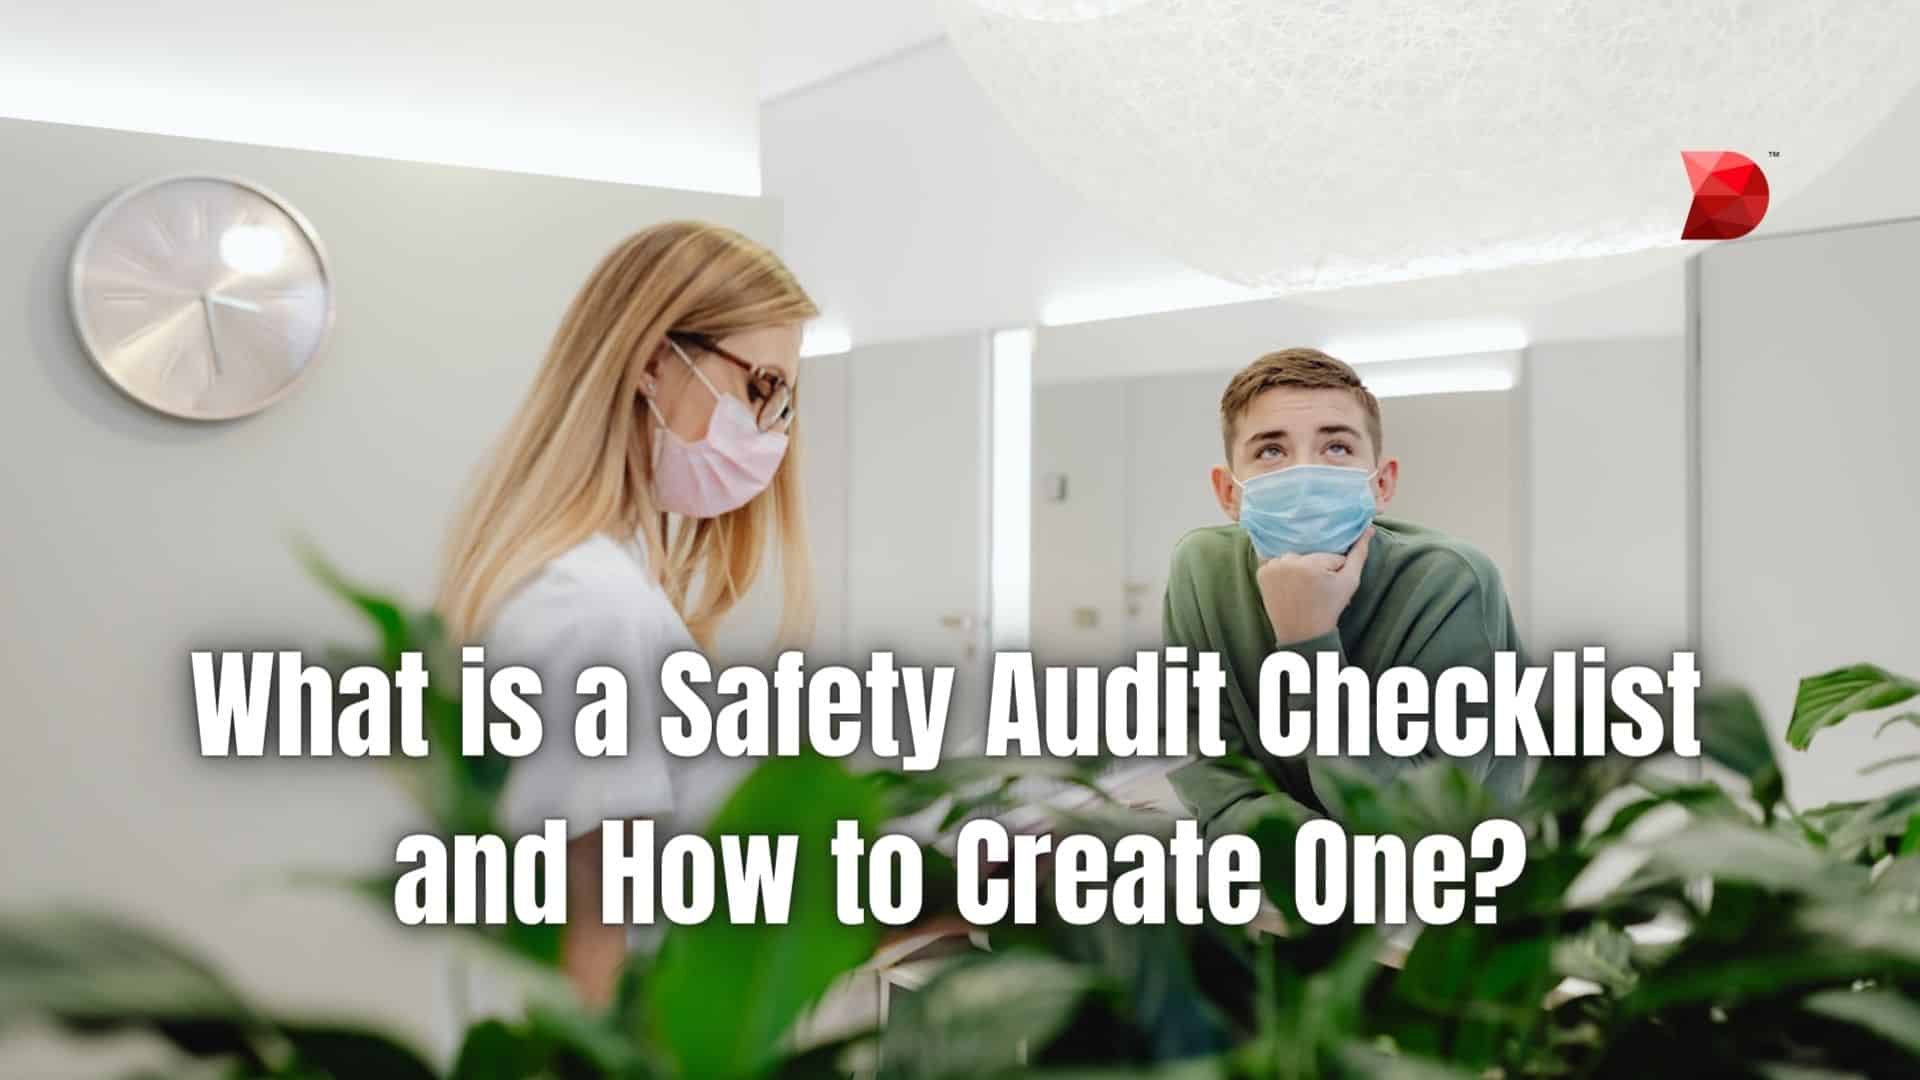 What is a Safety Audit Checklist and How to Create One